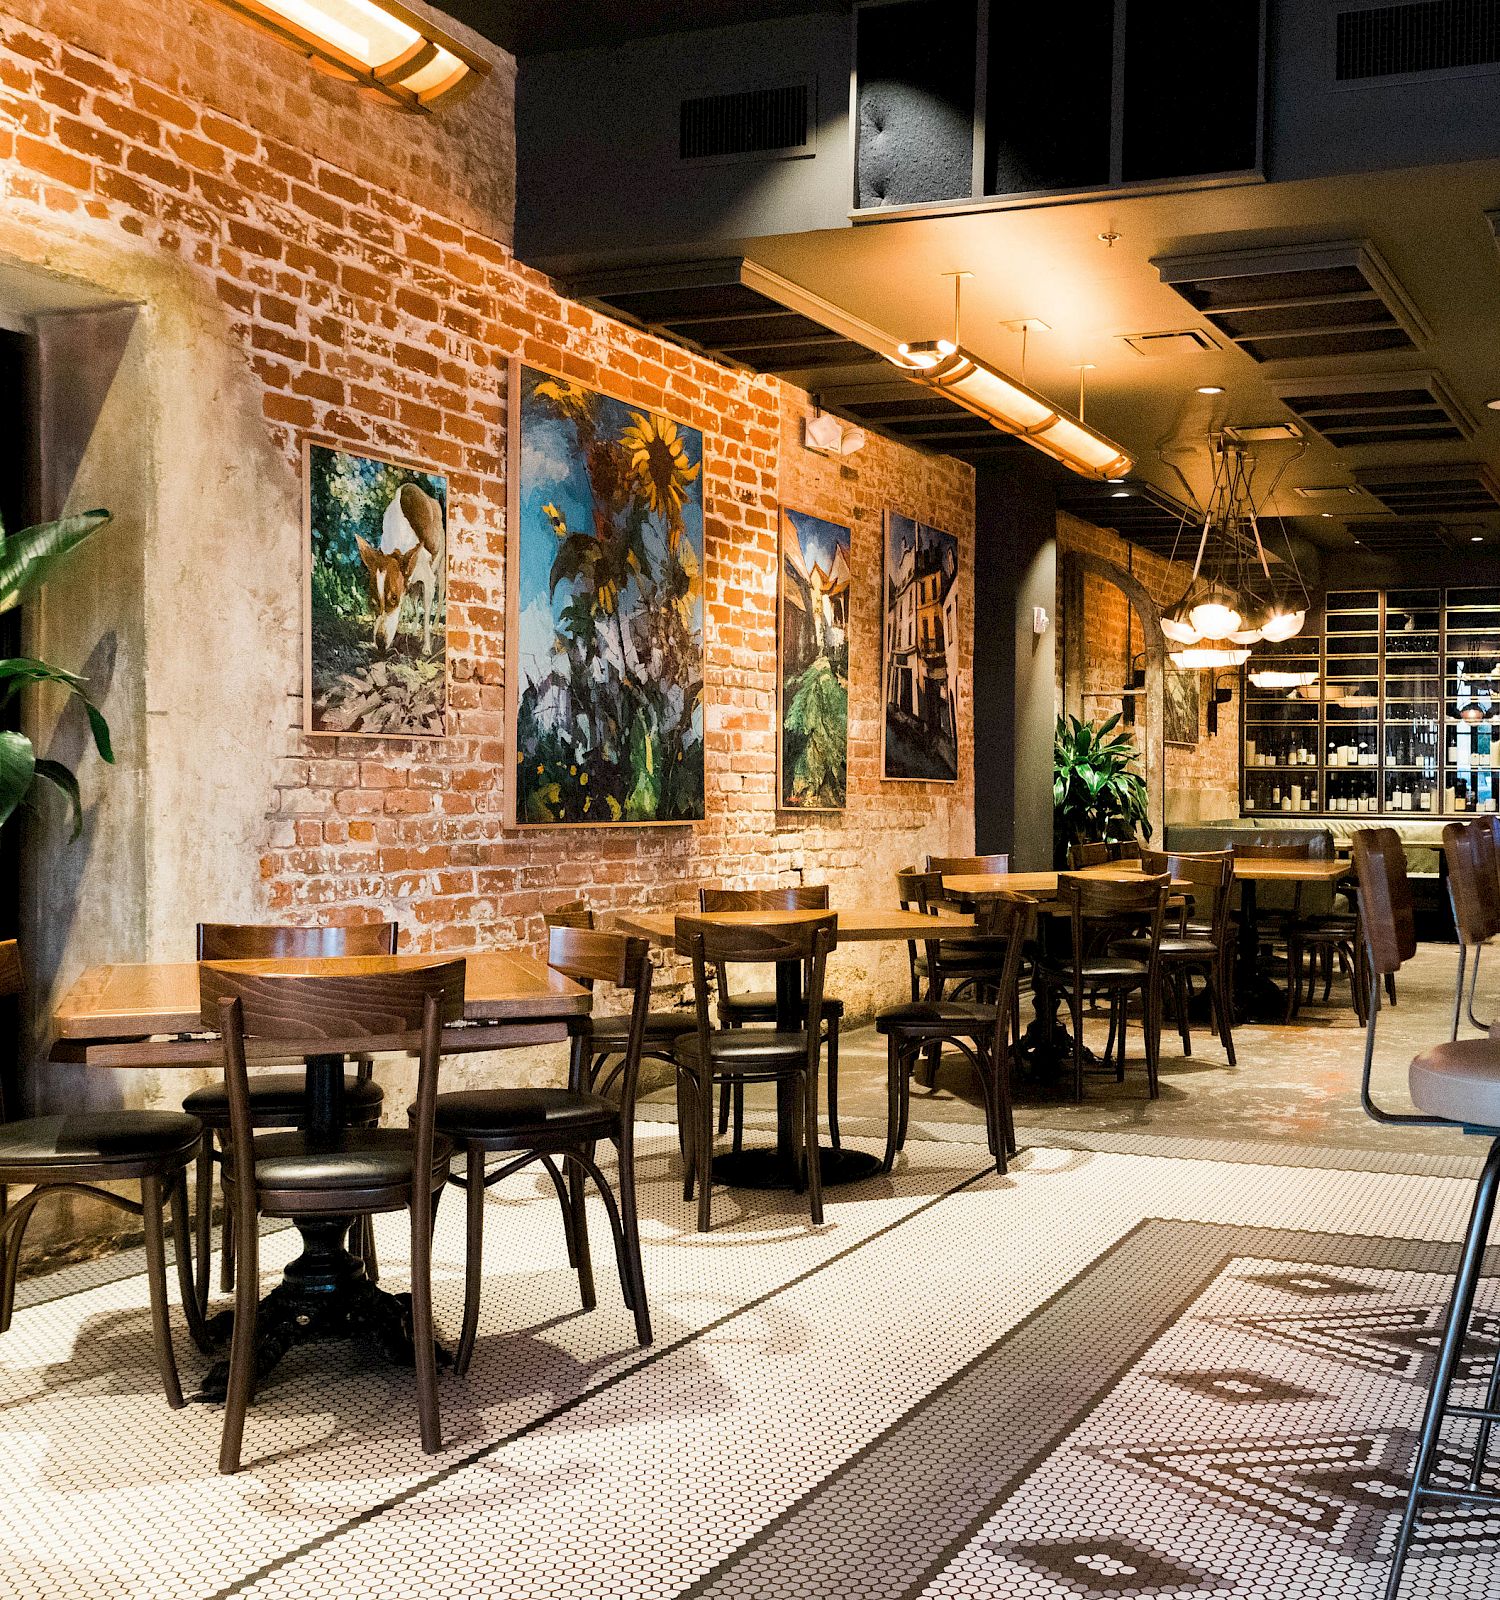 A cozy restaurant interior with exposed brick, artwork, and wooden furniture.